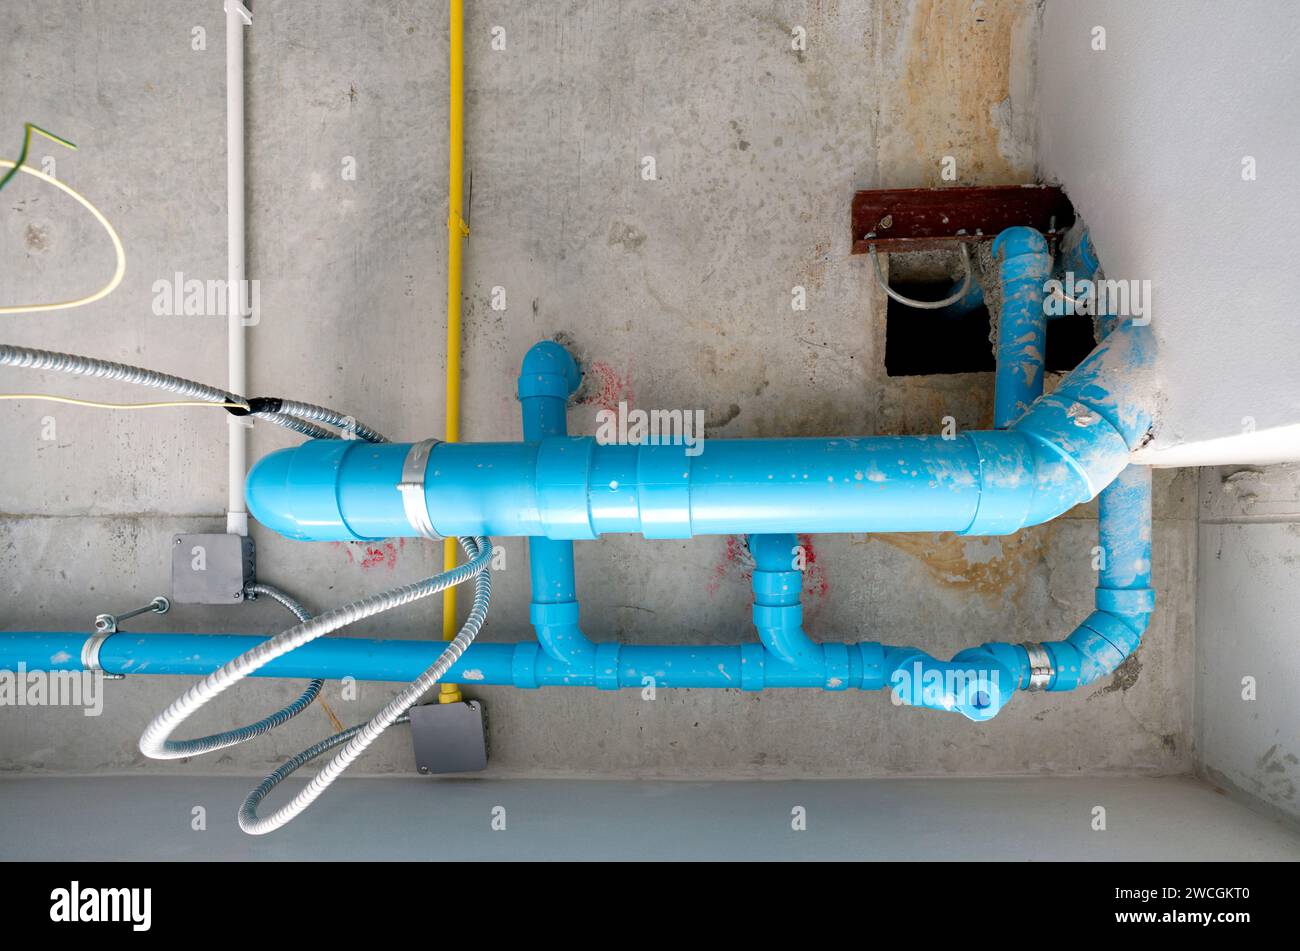 The water pipe system, wastewater pipes and electrical wiring are neatly installed under the ceiling. Stock Photo